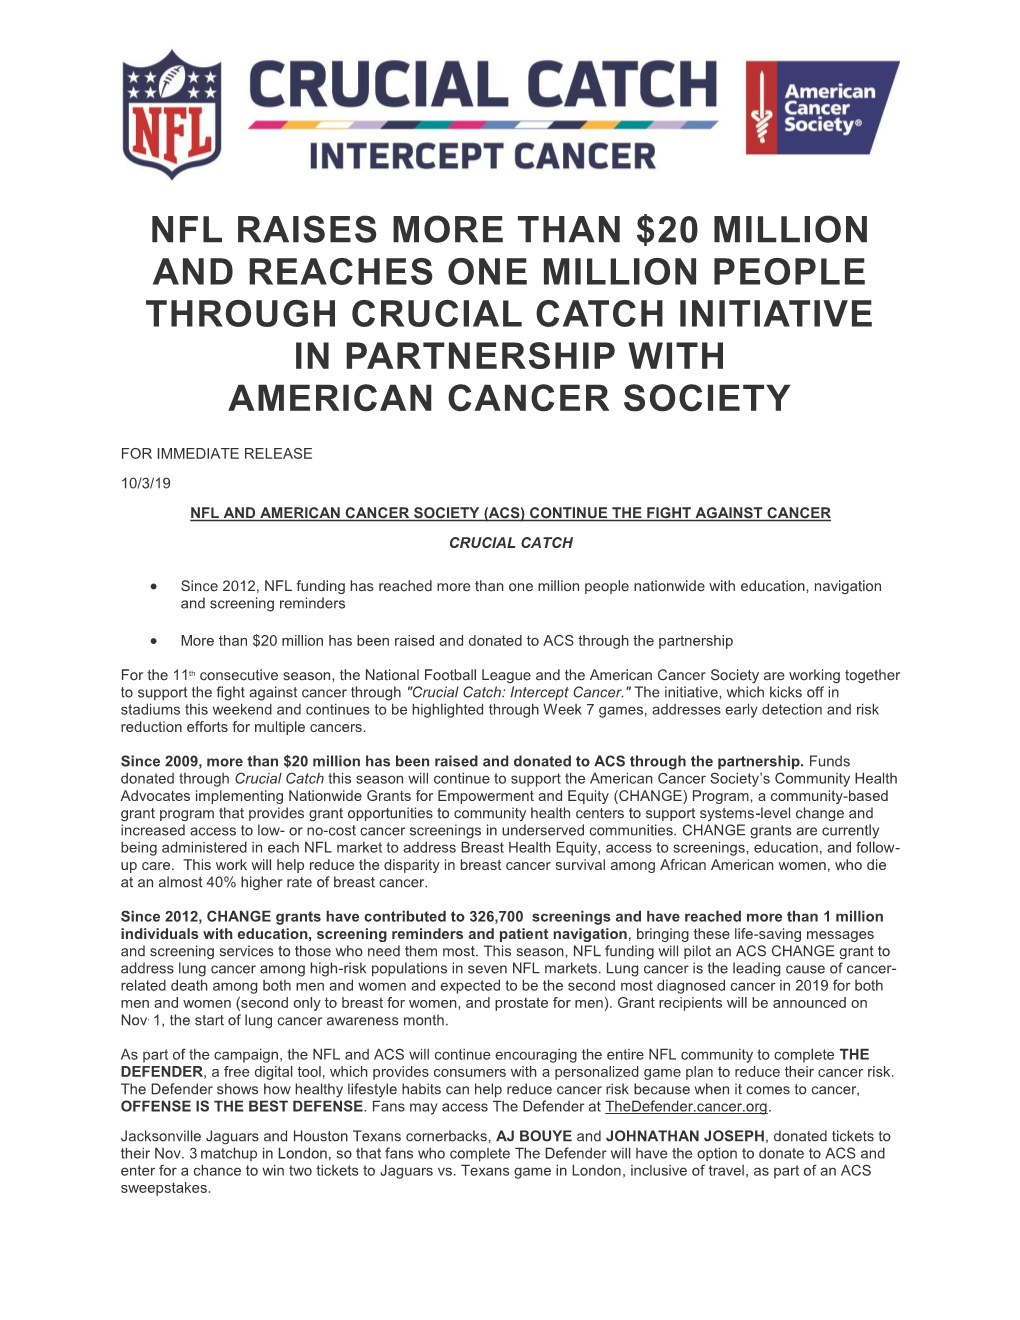 Nfl and American Cancer Society (Acs) Continue the Fight Against Cancer Crucial Catch